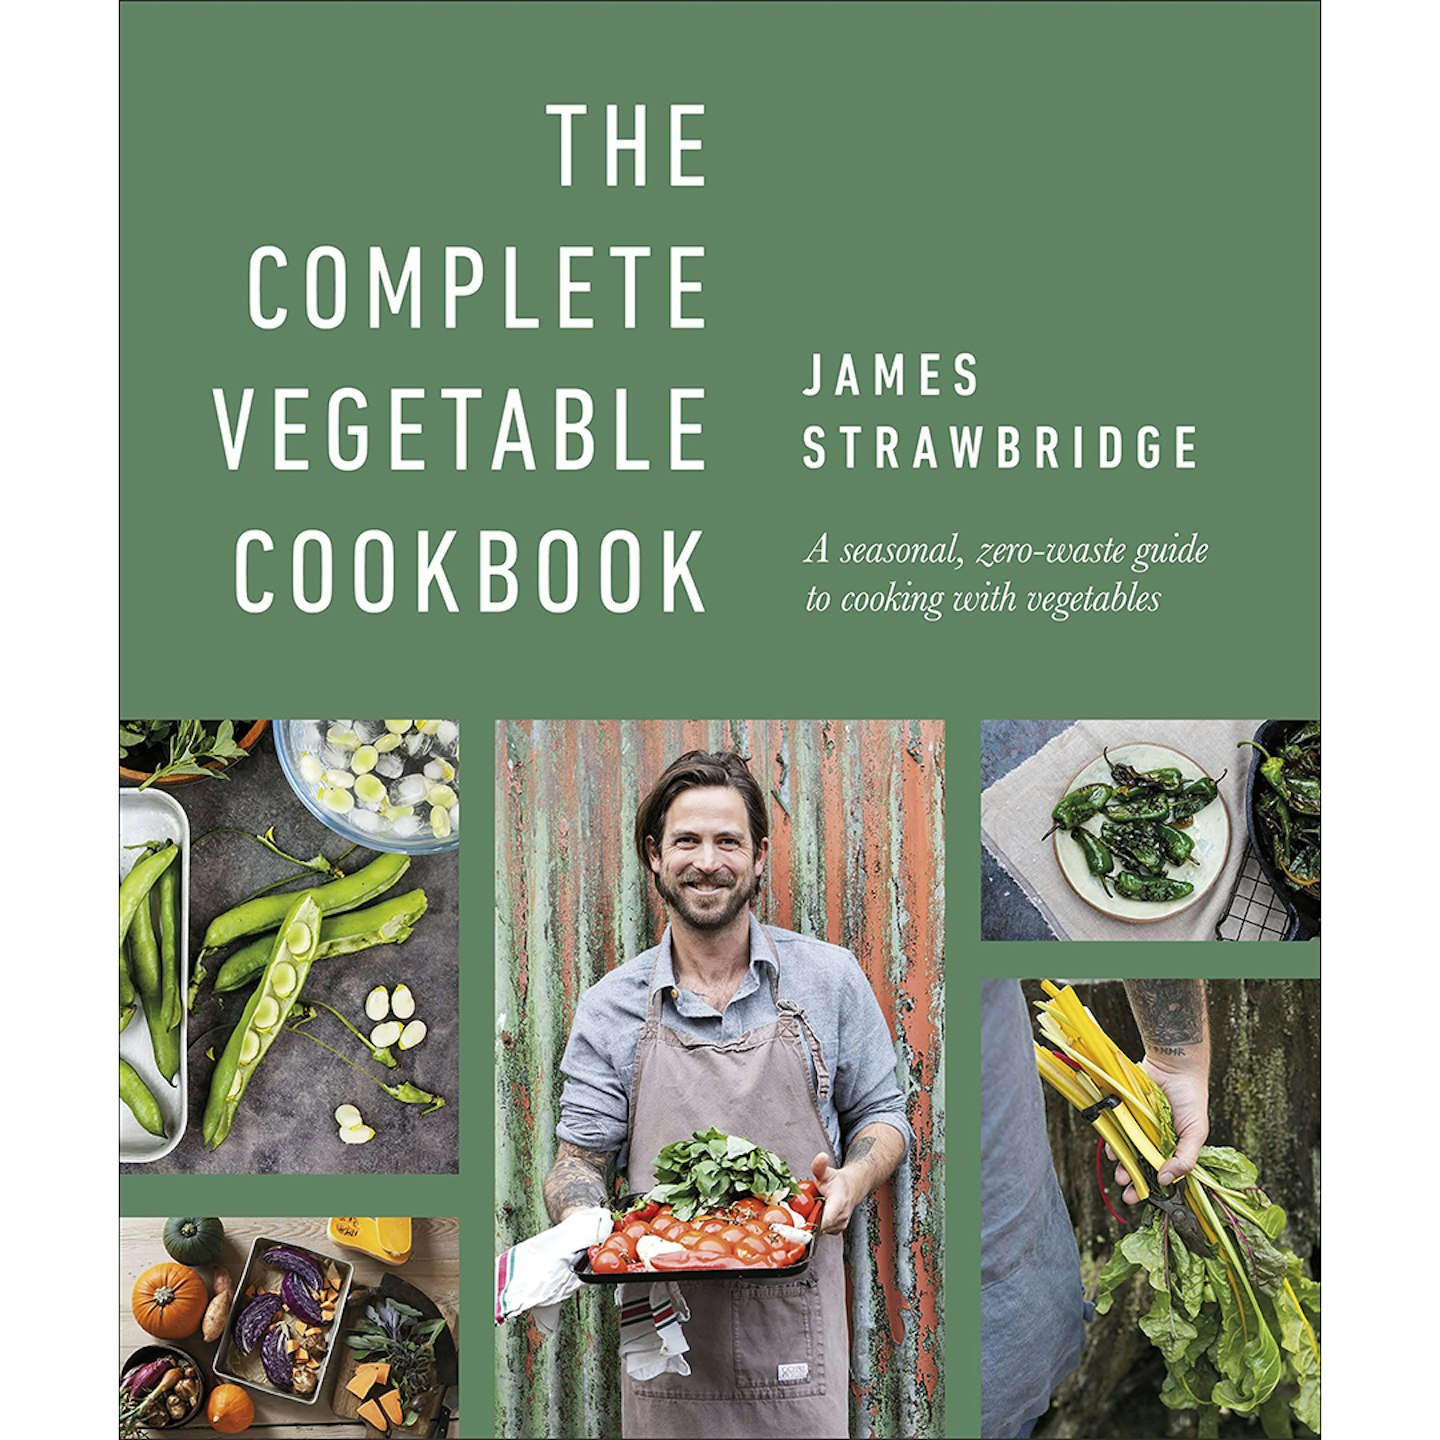 The Complete Vegetable Cookbook